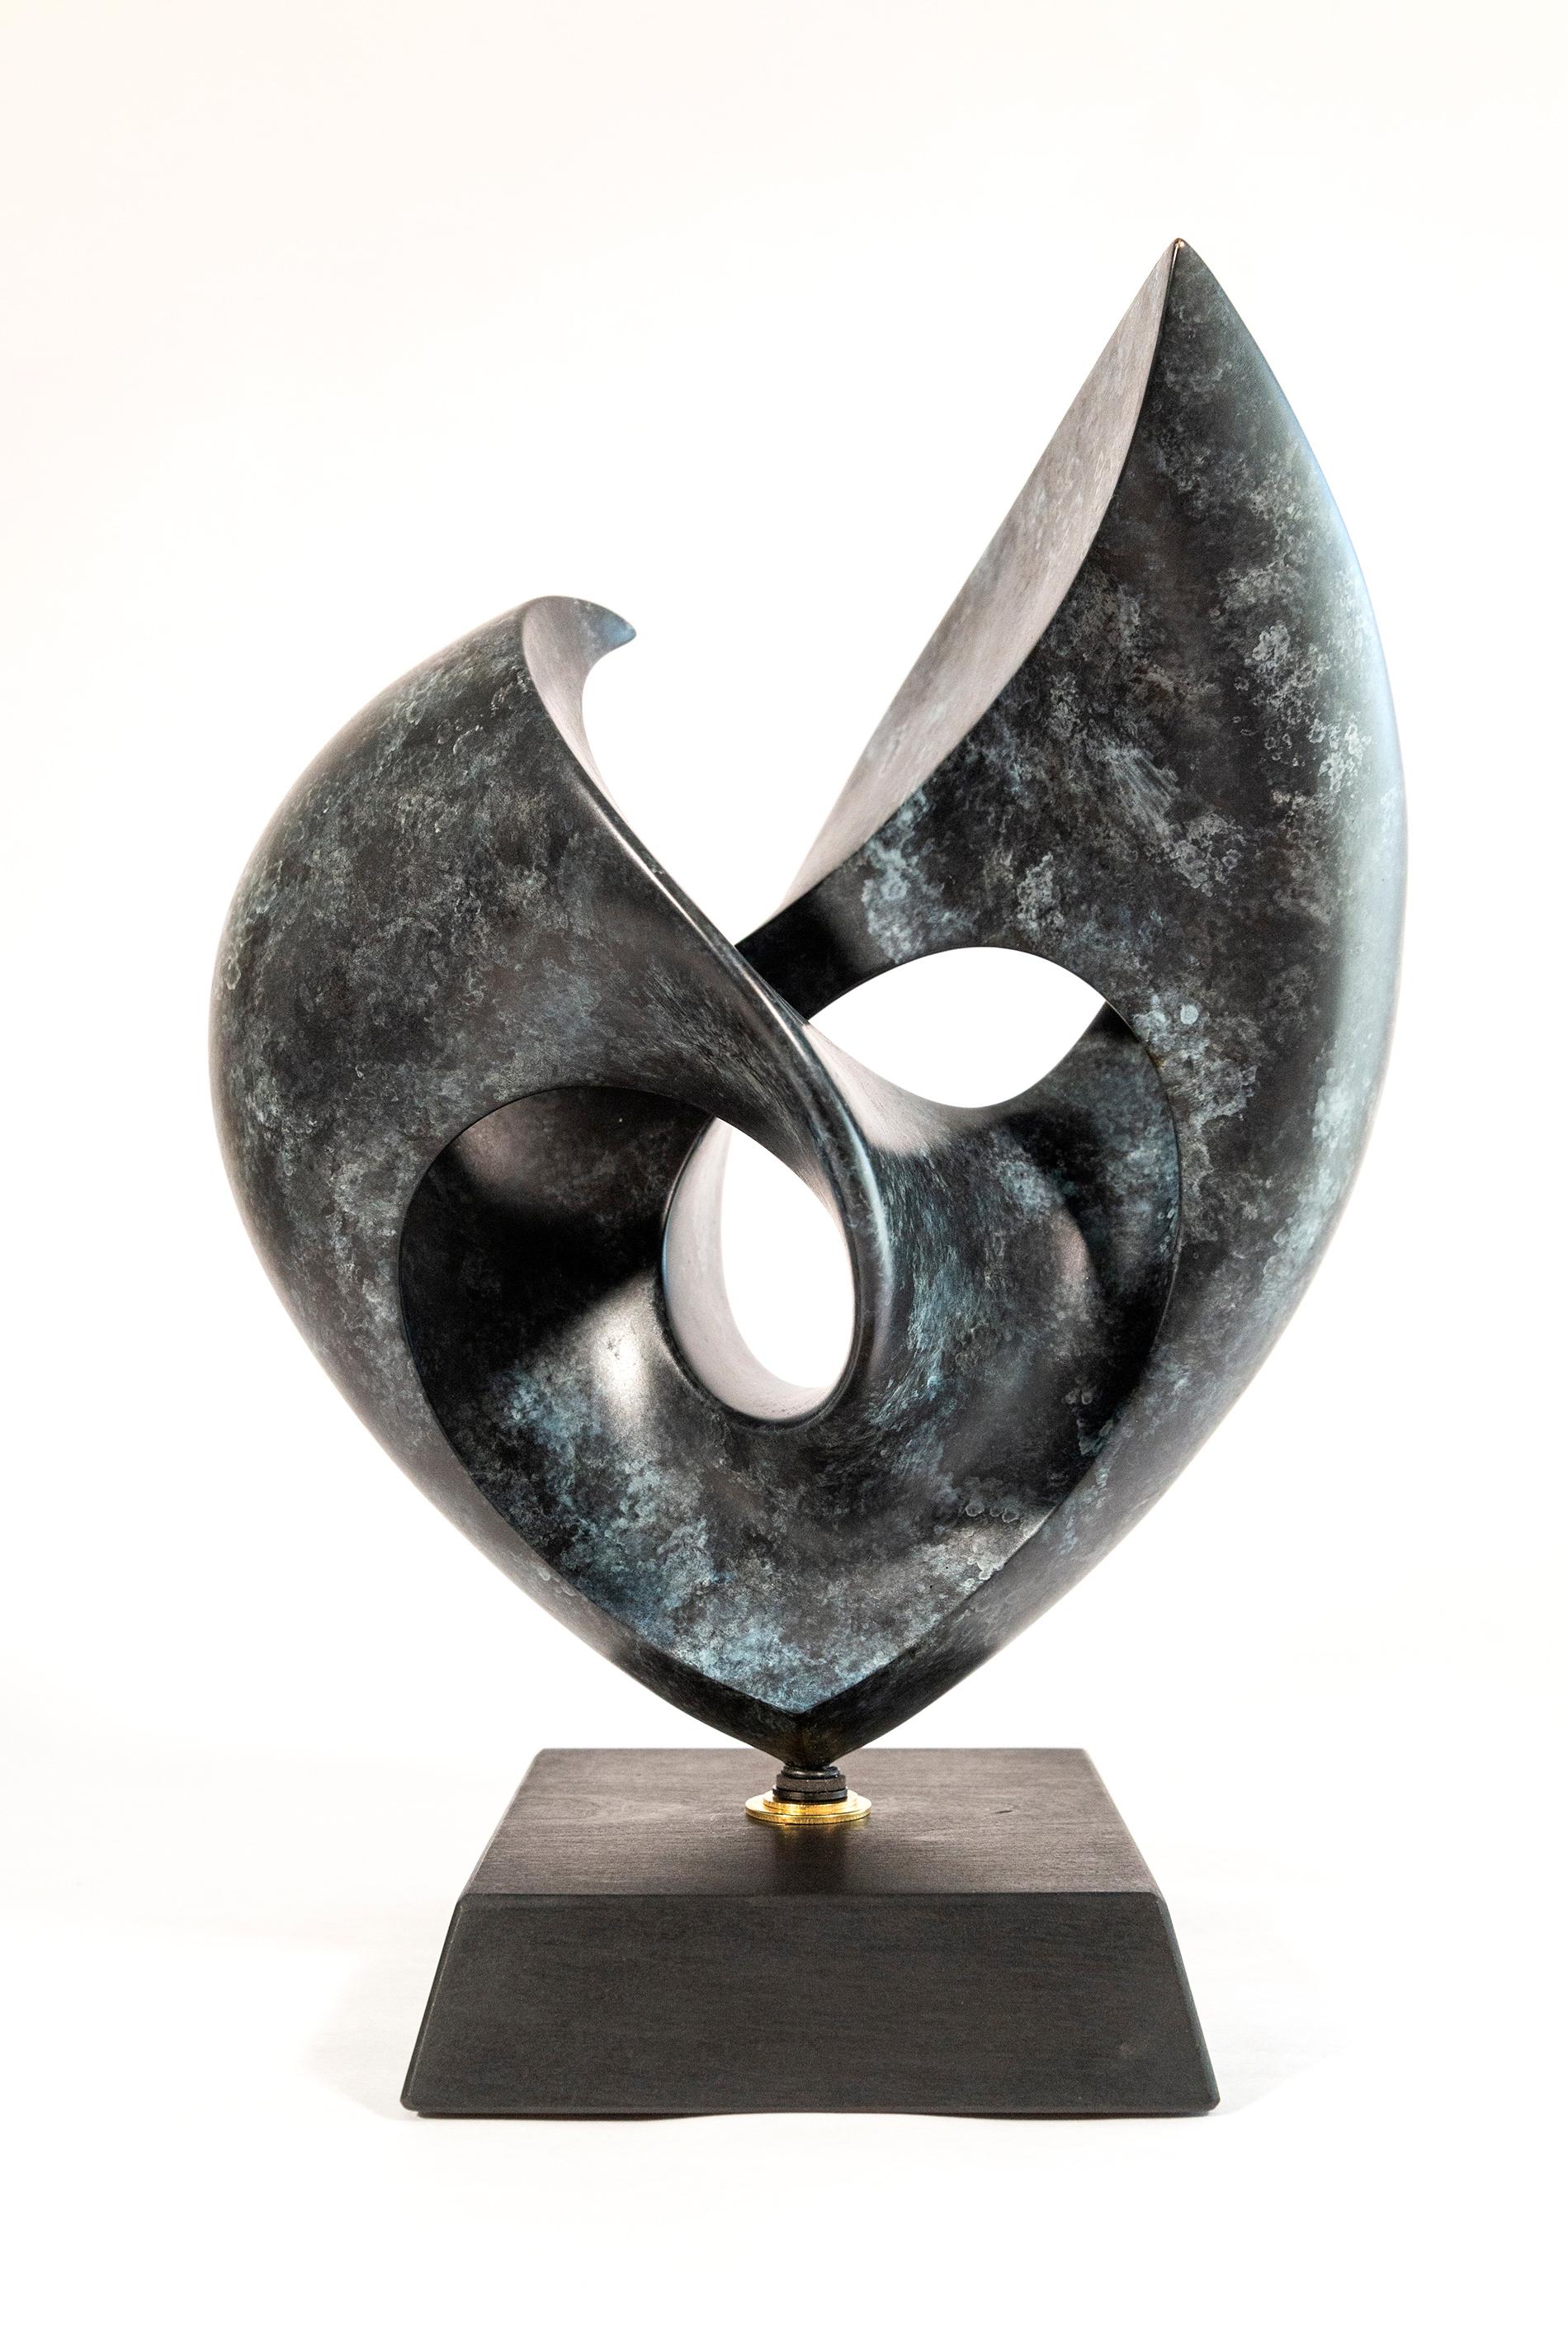 Rhapsody Ed. 1/15 - smooth, polished, abstract, bronze and mahogany sculpture